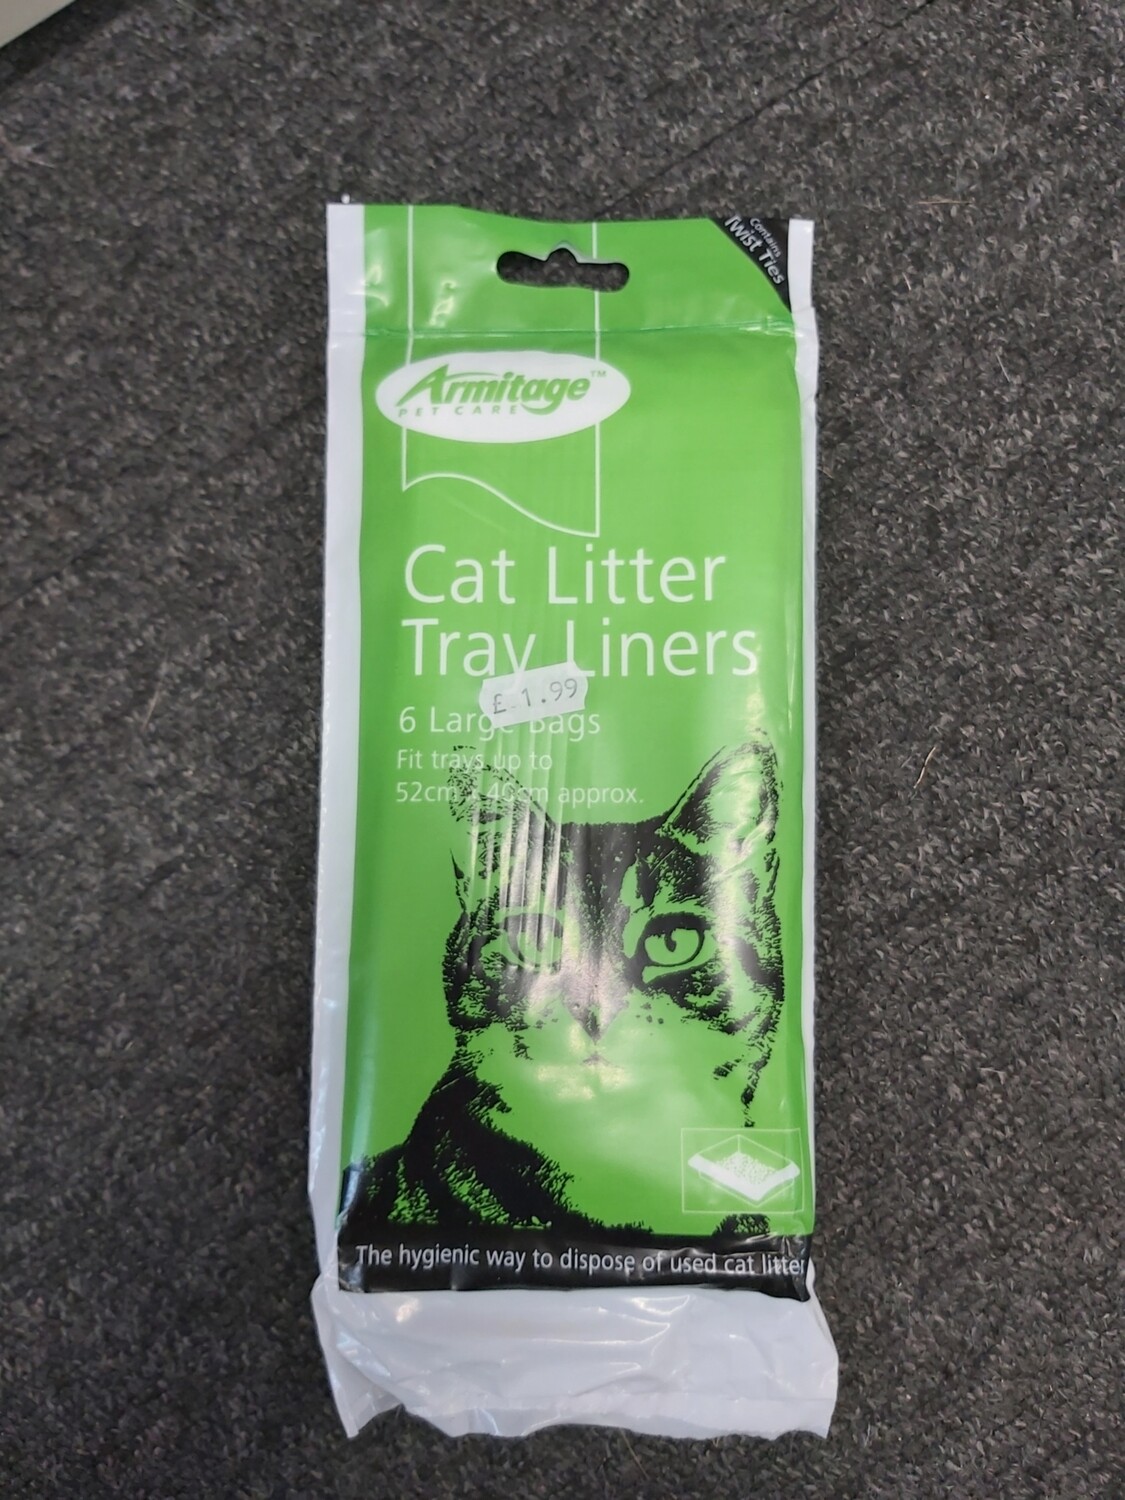 Cat litter tray liners